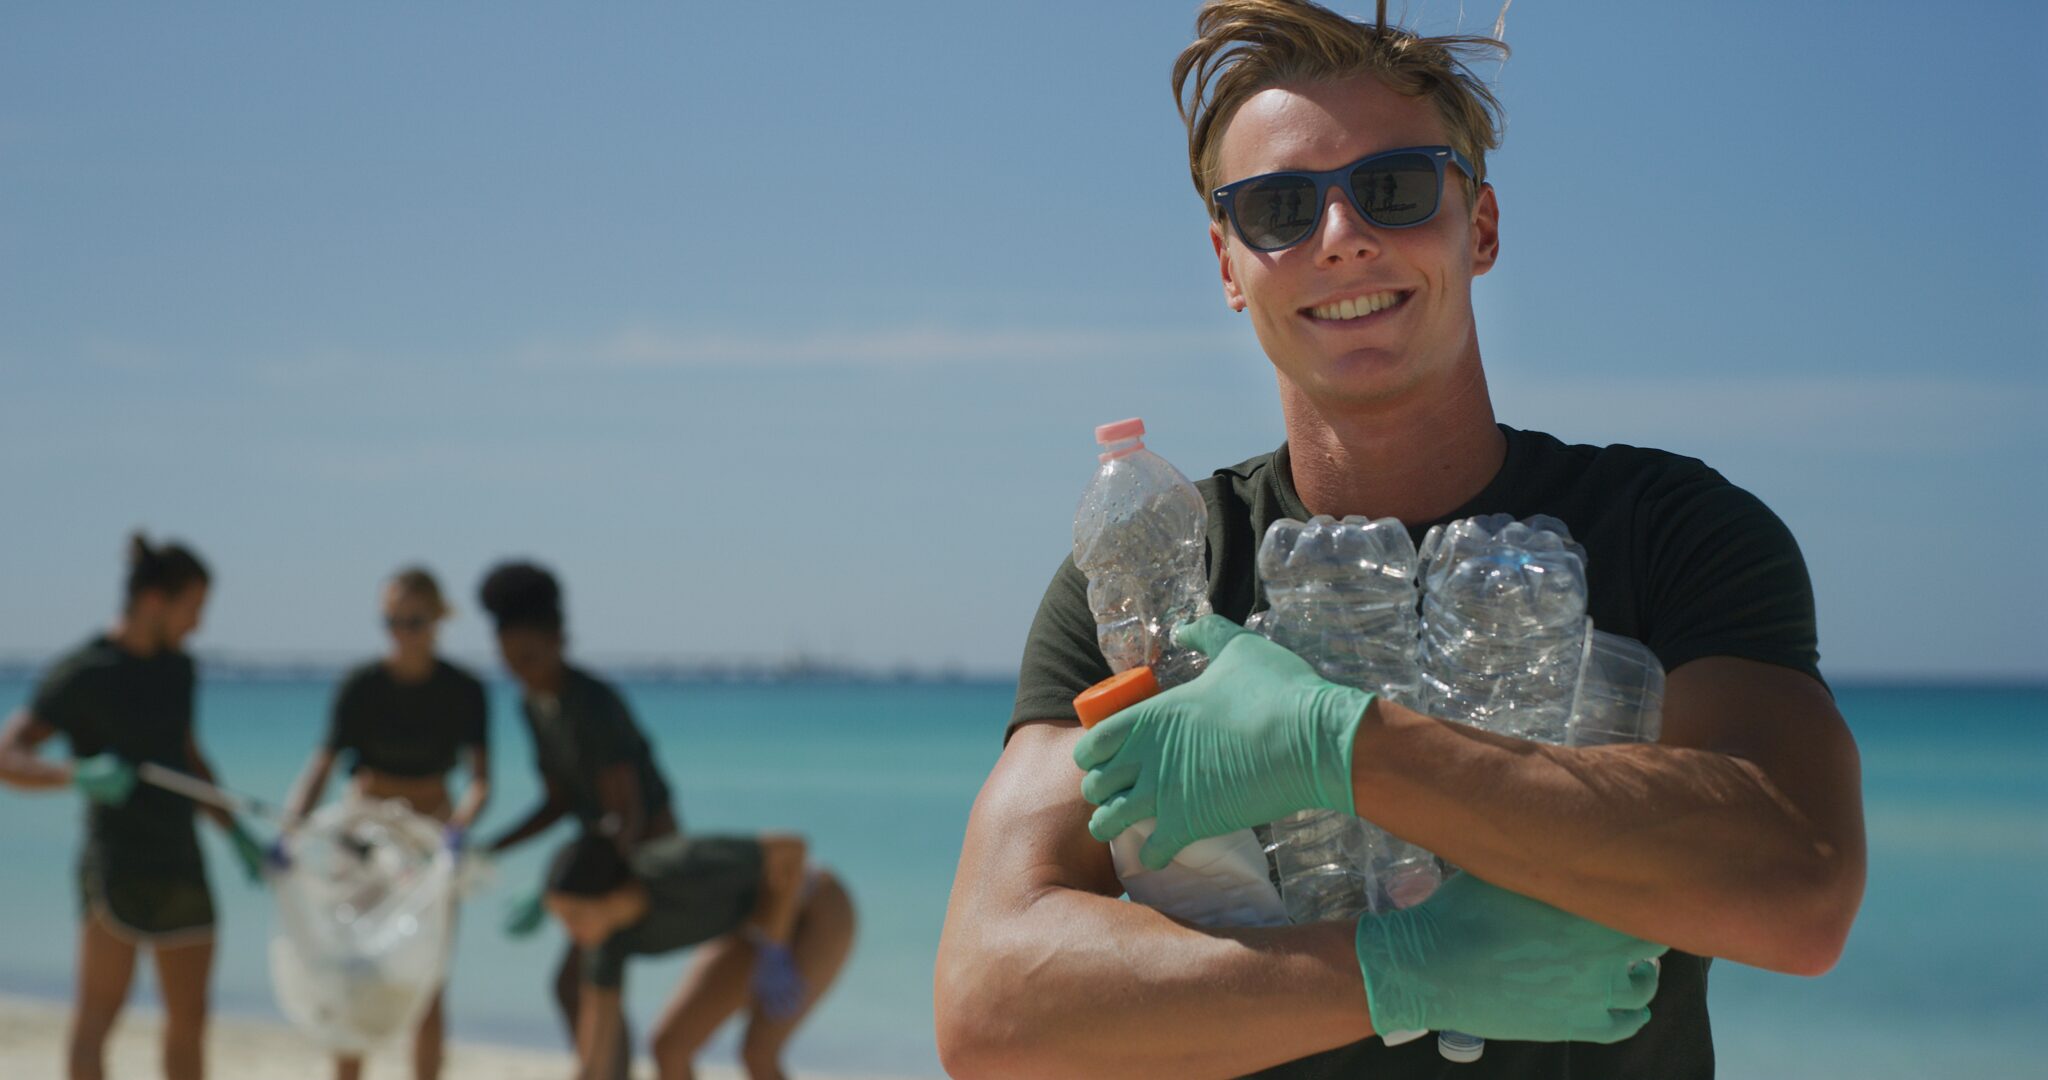 A young man in sunglasses cleans up plastic from a beach